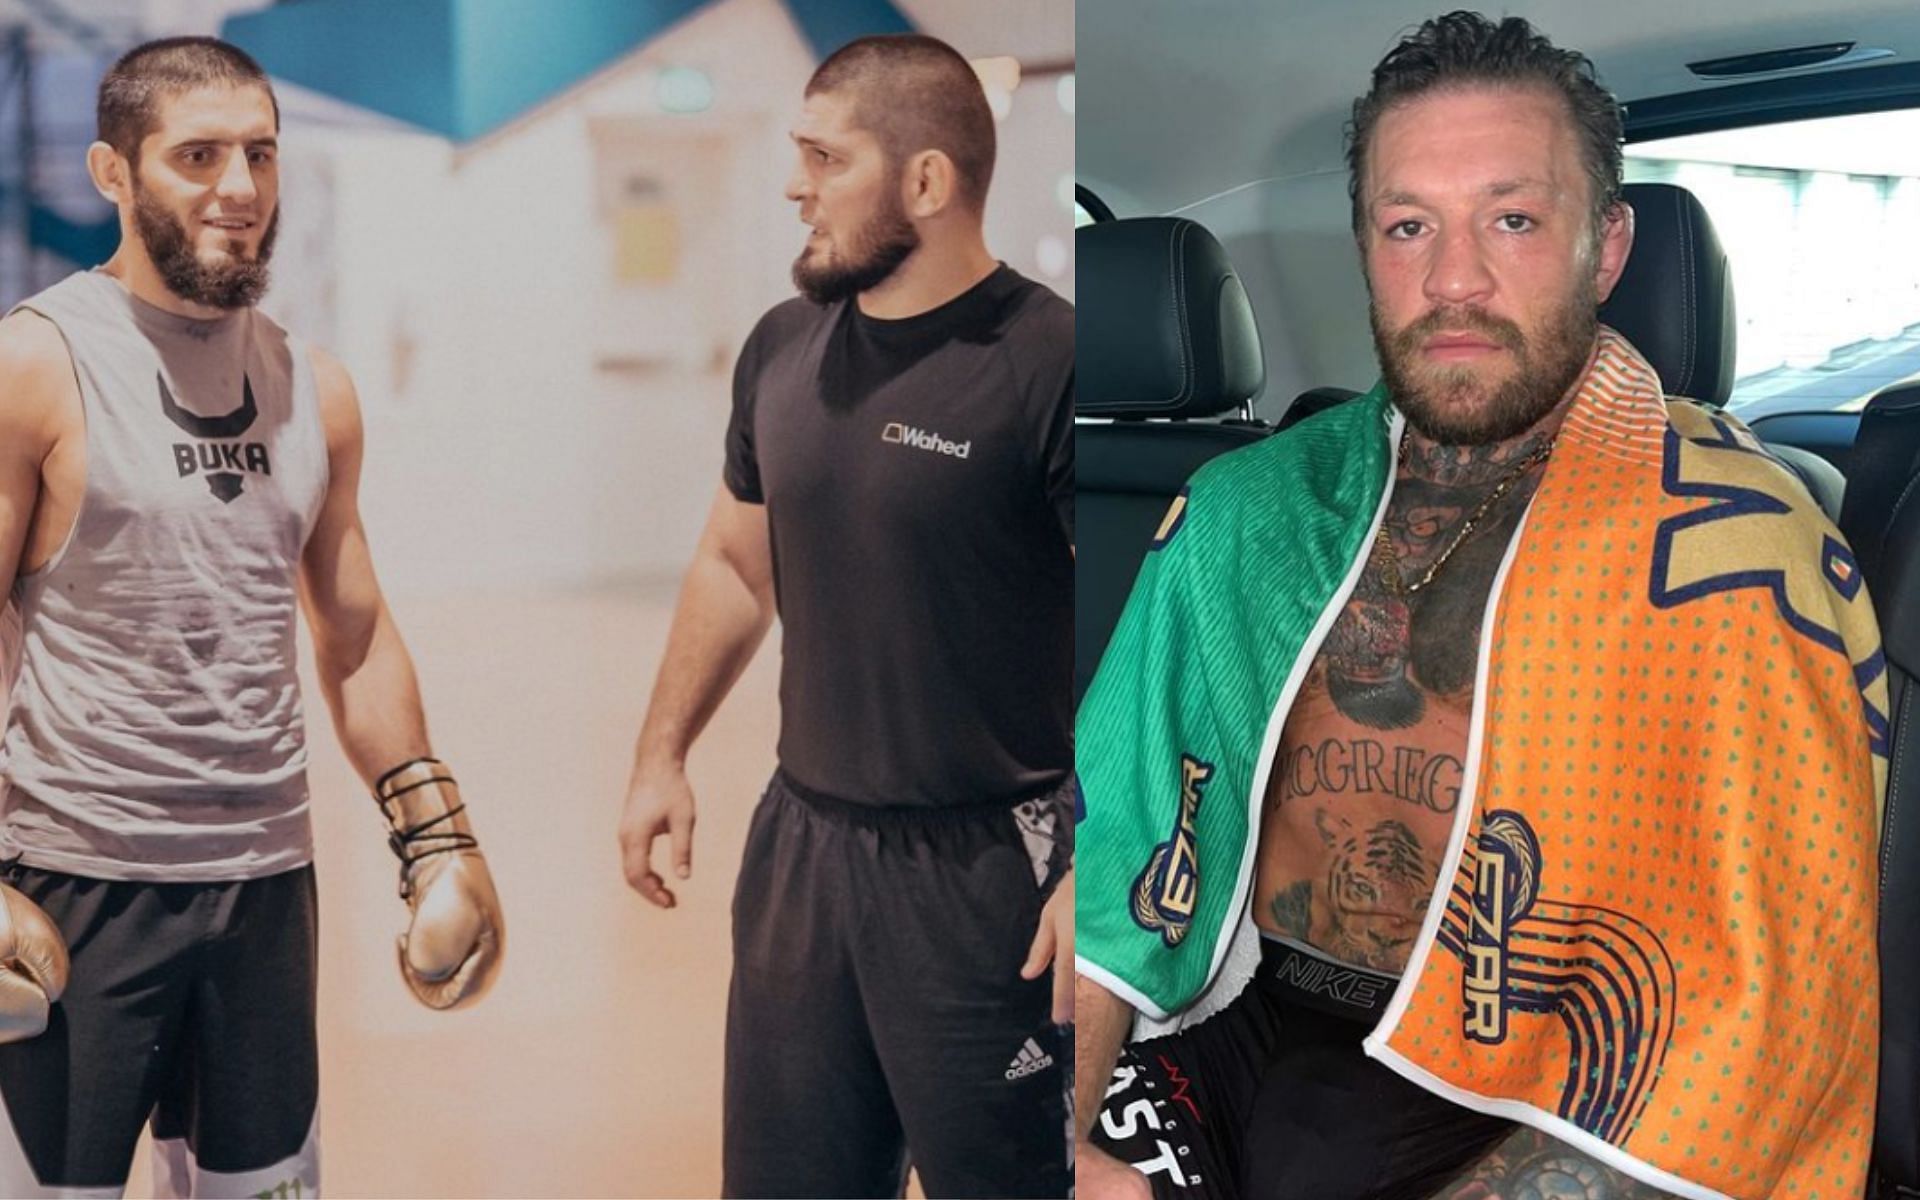 Conor McGregor (right) takes aim at Nurmagomedov camp (left)over steroid usage with recent tweet [Images Courtesy: @thenotoriousmma and @khabib_nurmagomedov on Instagram]